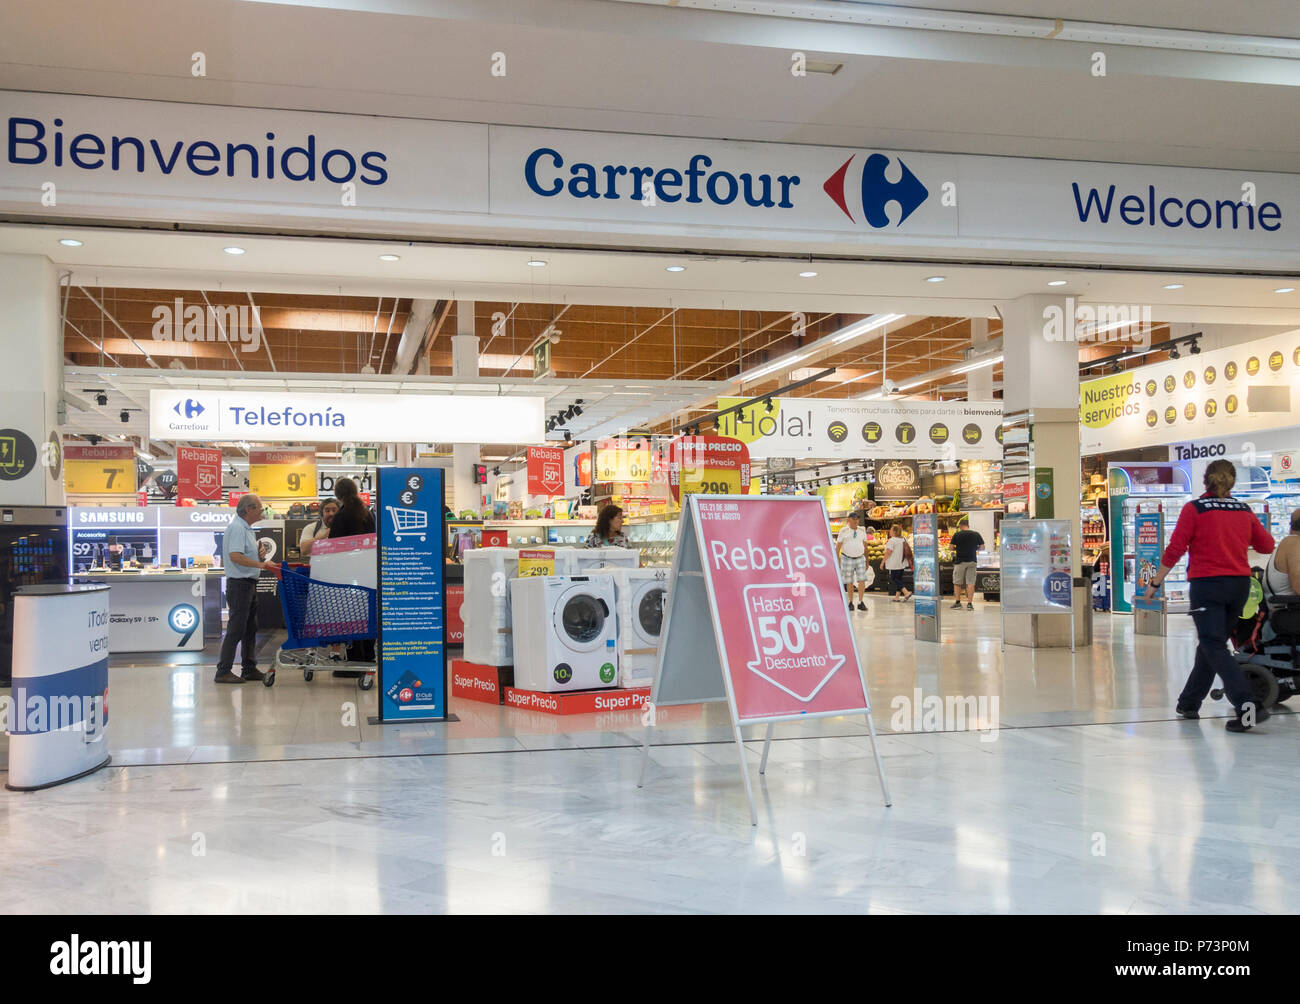 Carrefour supermarket entrance in Spain Stock Photo